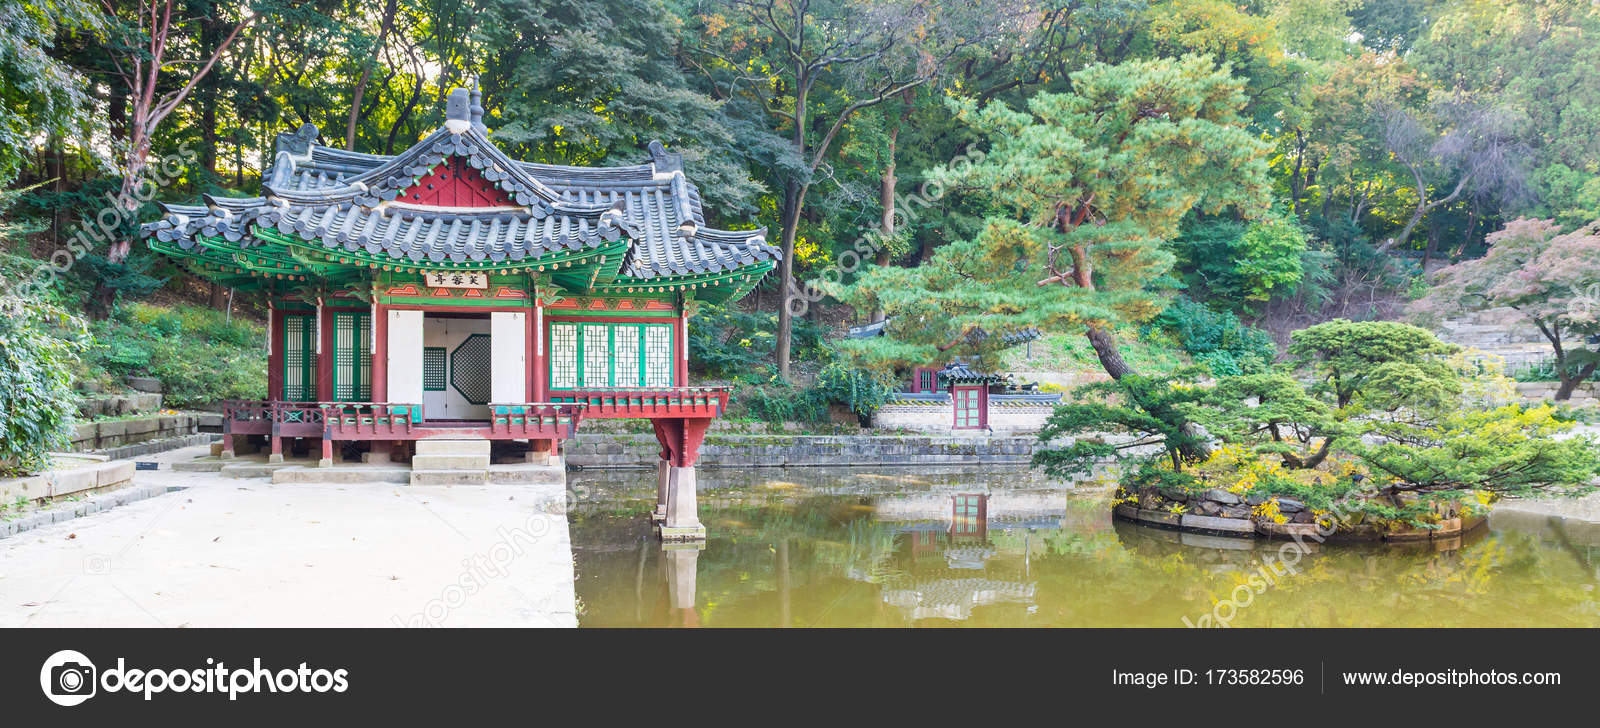 The Pavillion At Secret Garden Of Changdeokgung Palace In Seoul